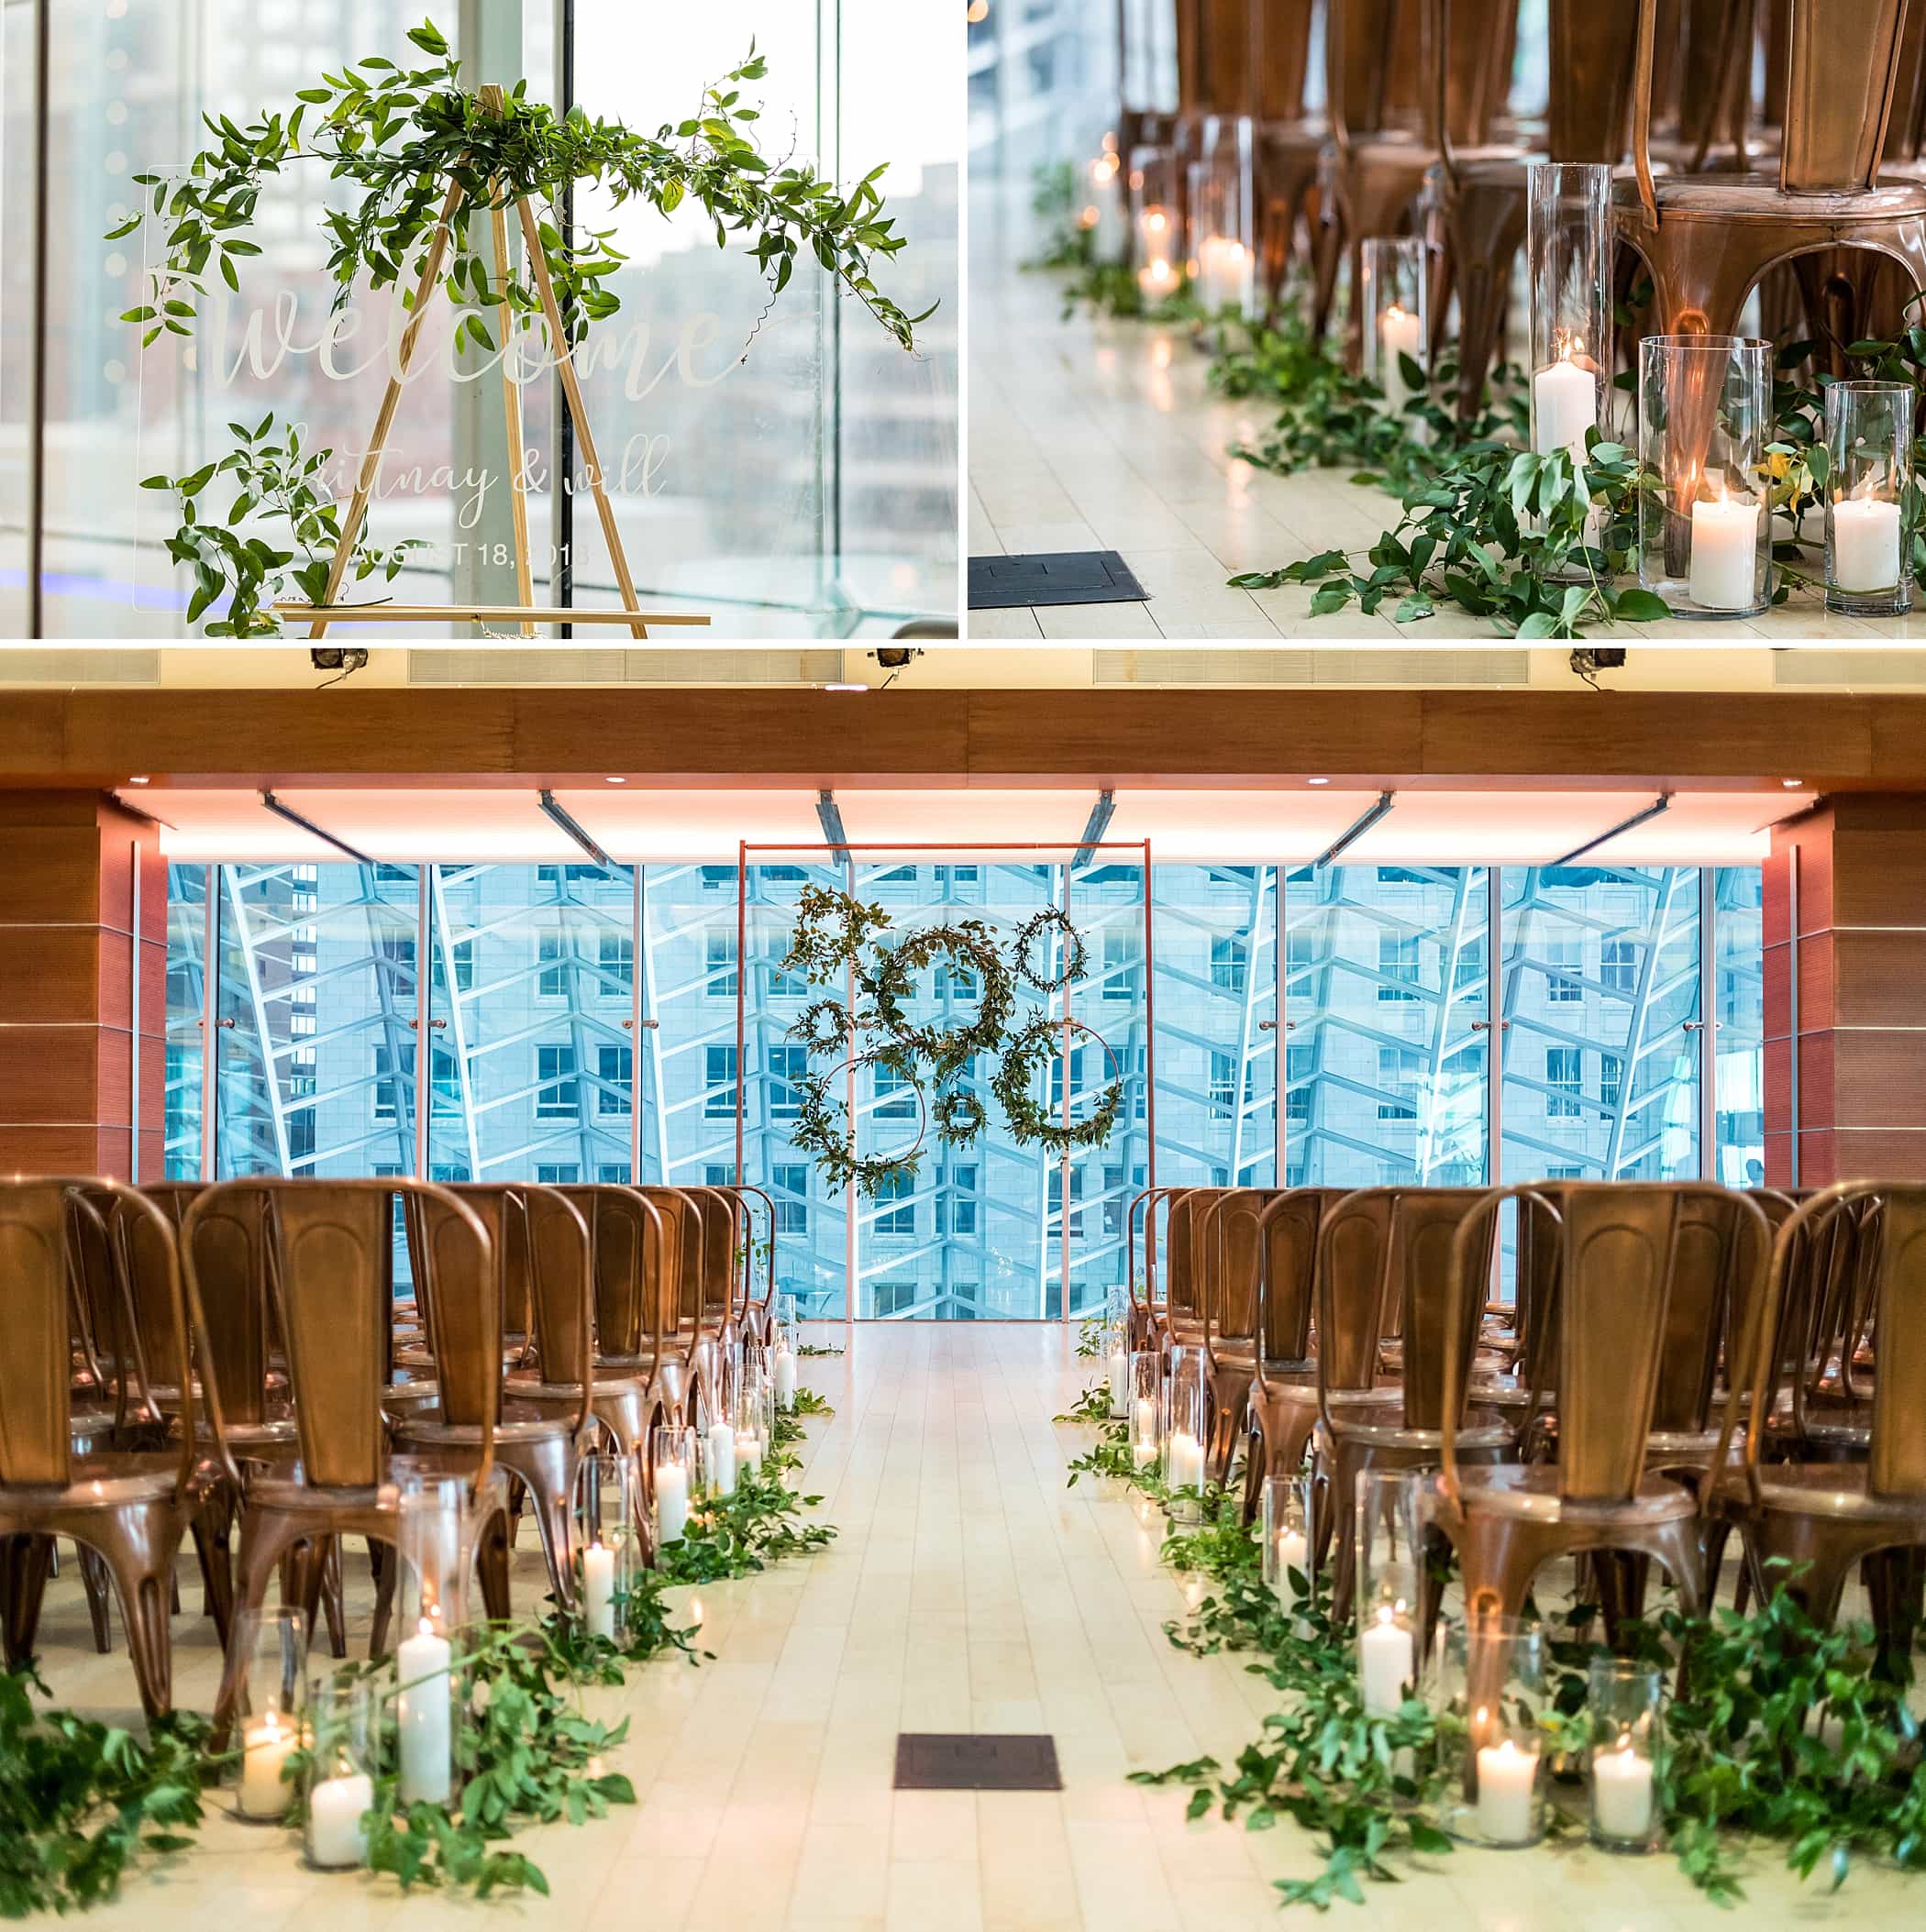 Copper & Glass wedding ceremony details with loose greenery and white candles in hurricanes